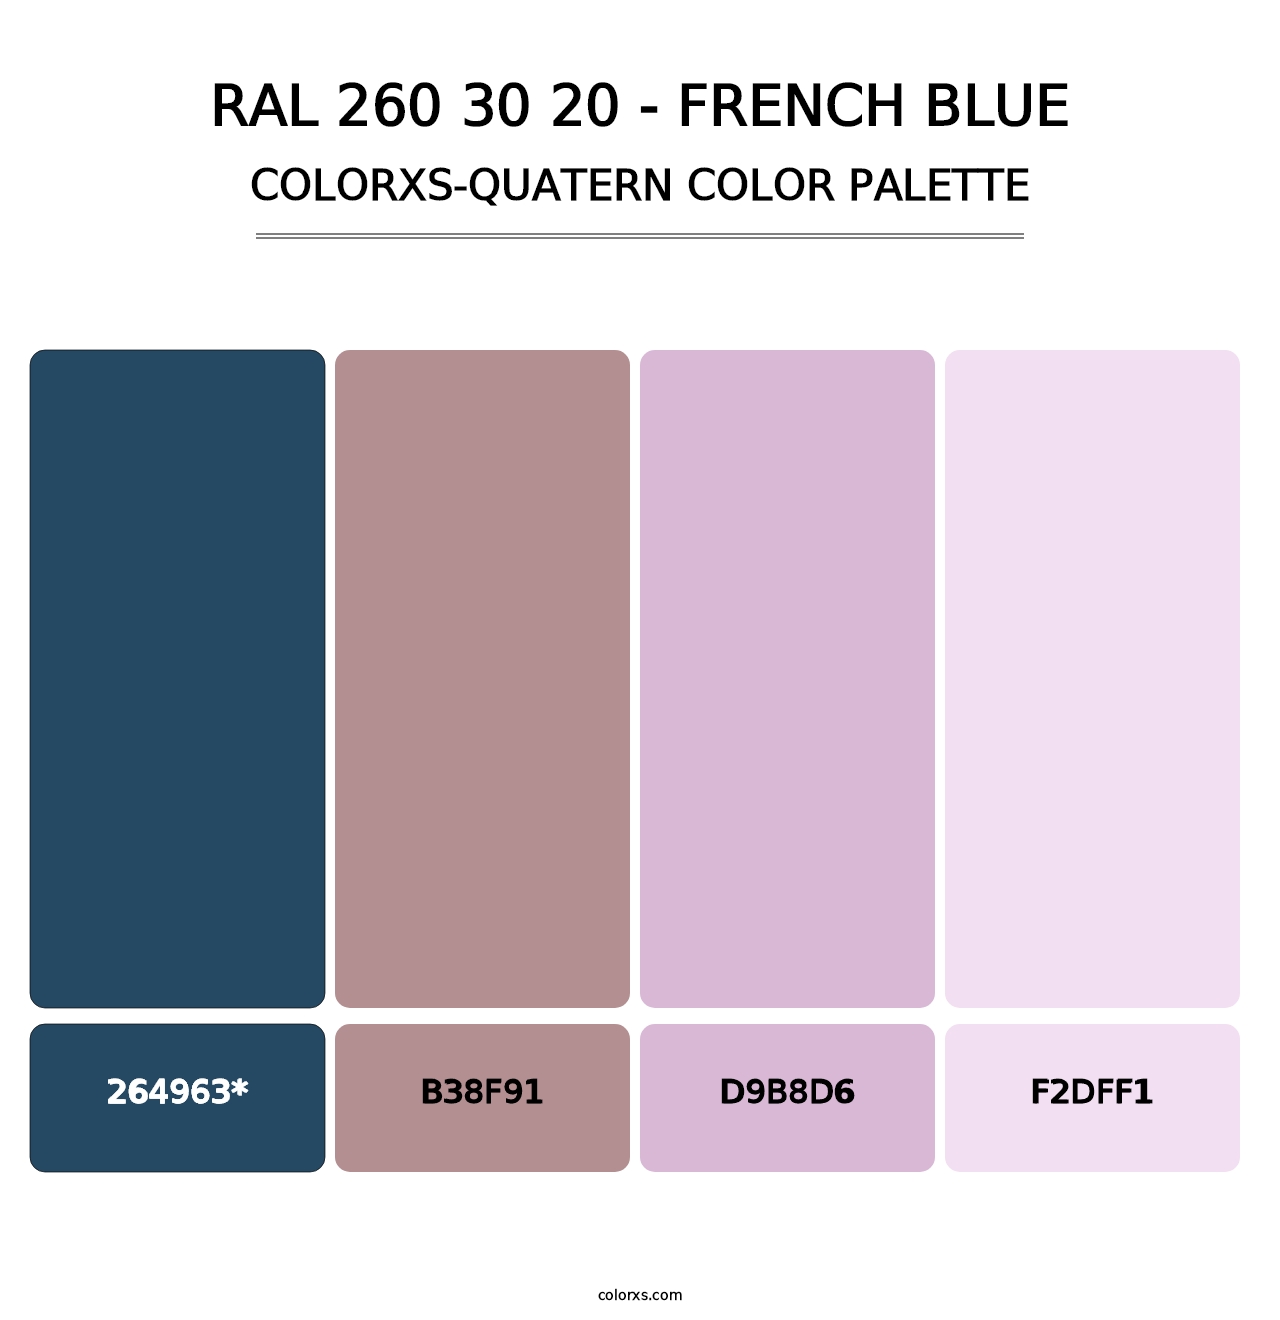 RAL 260 30 20 - French Blue - Colorxs Quatern Palette